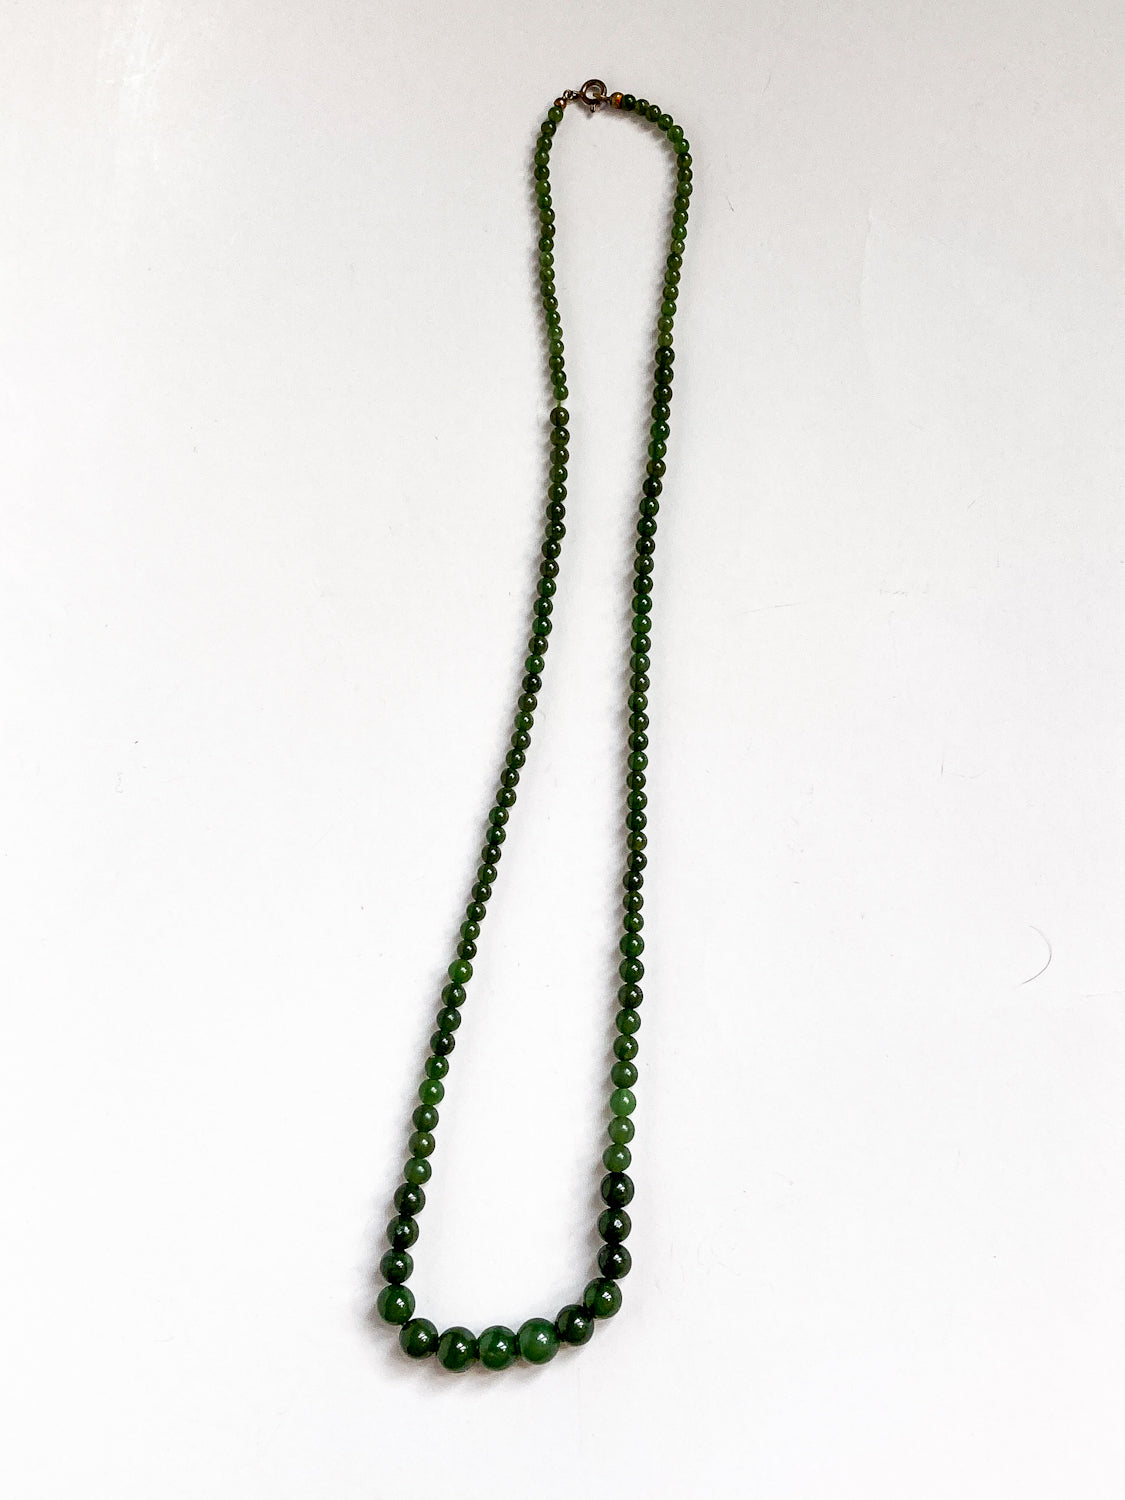 Vintage Graduated Green Nephrite Stone Bead Elongated Necklace full necklace